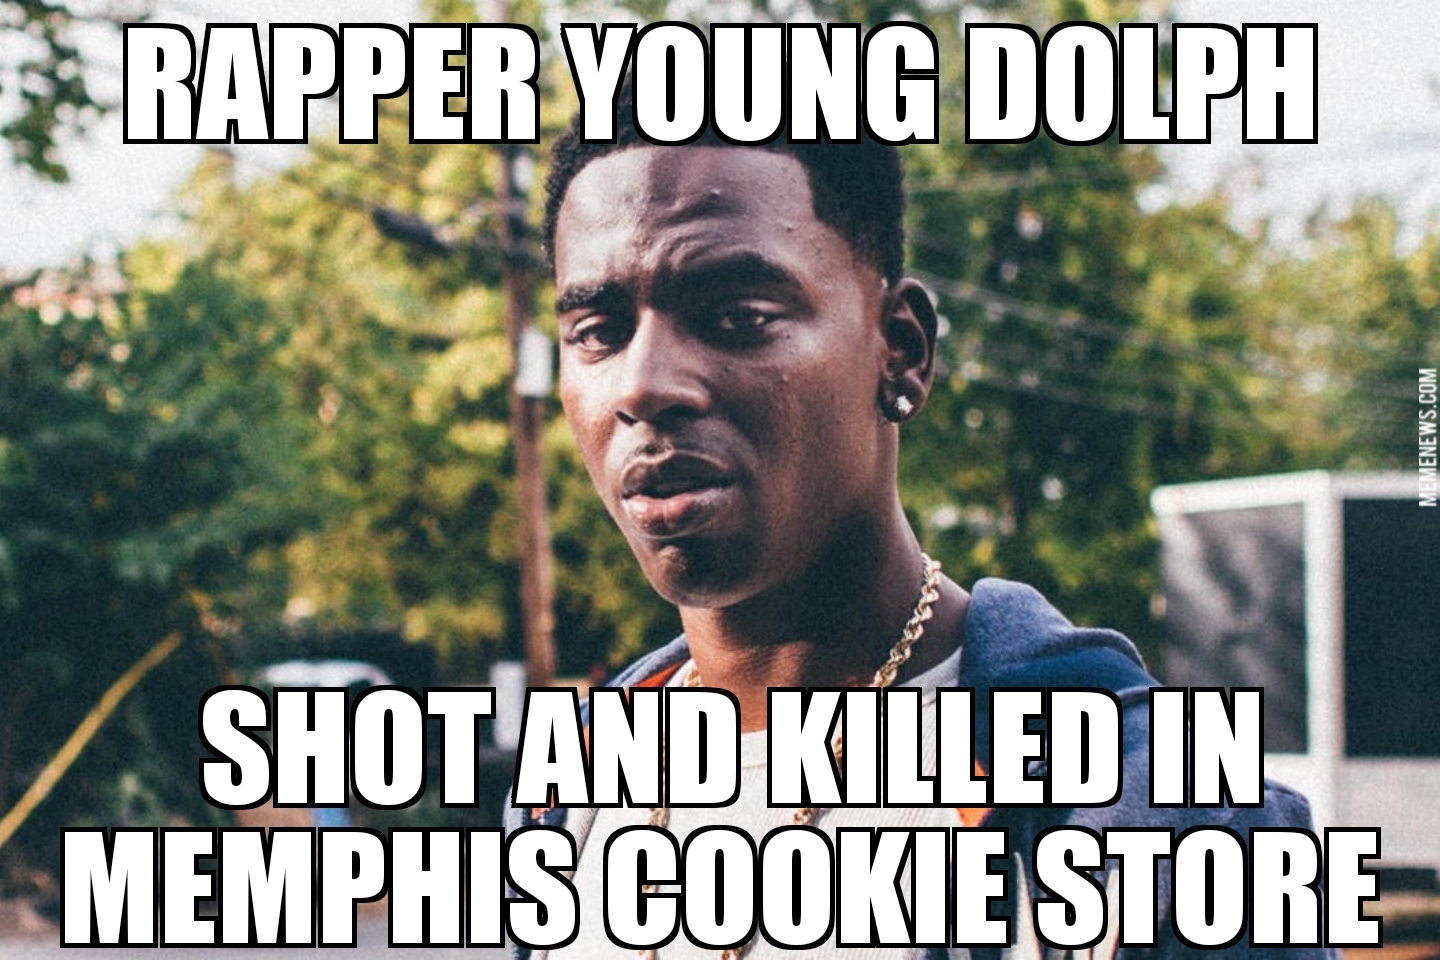 Young Dolph killed